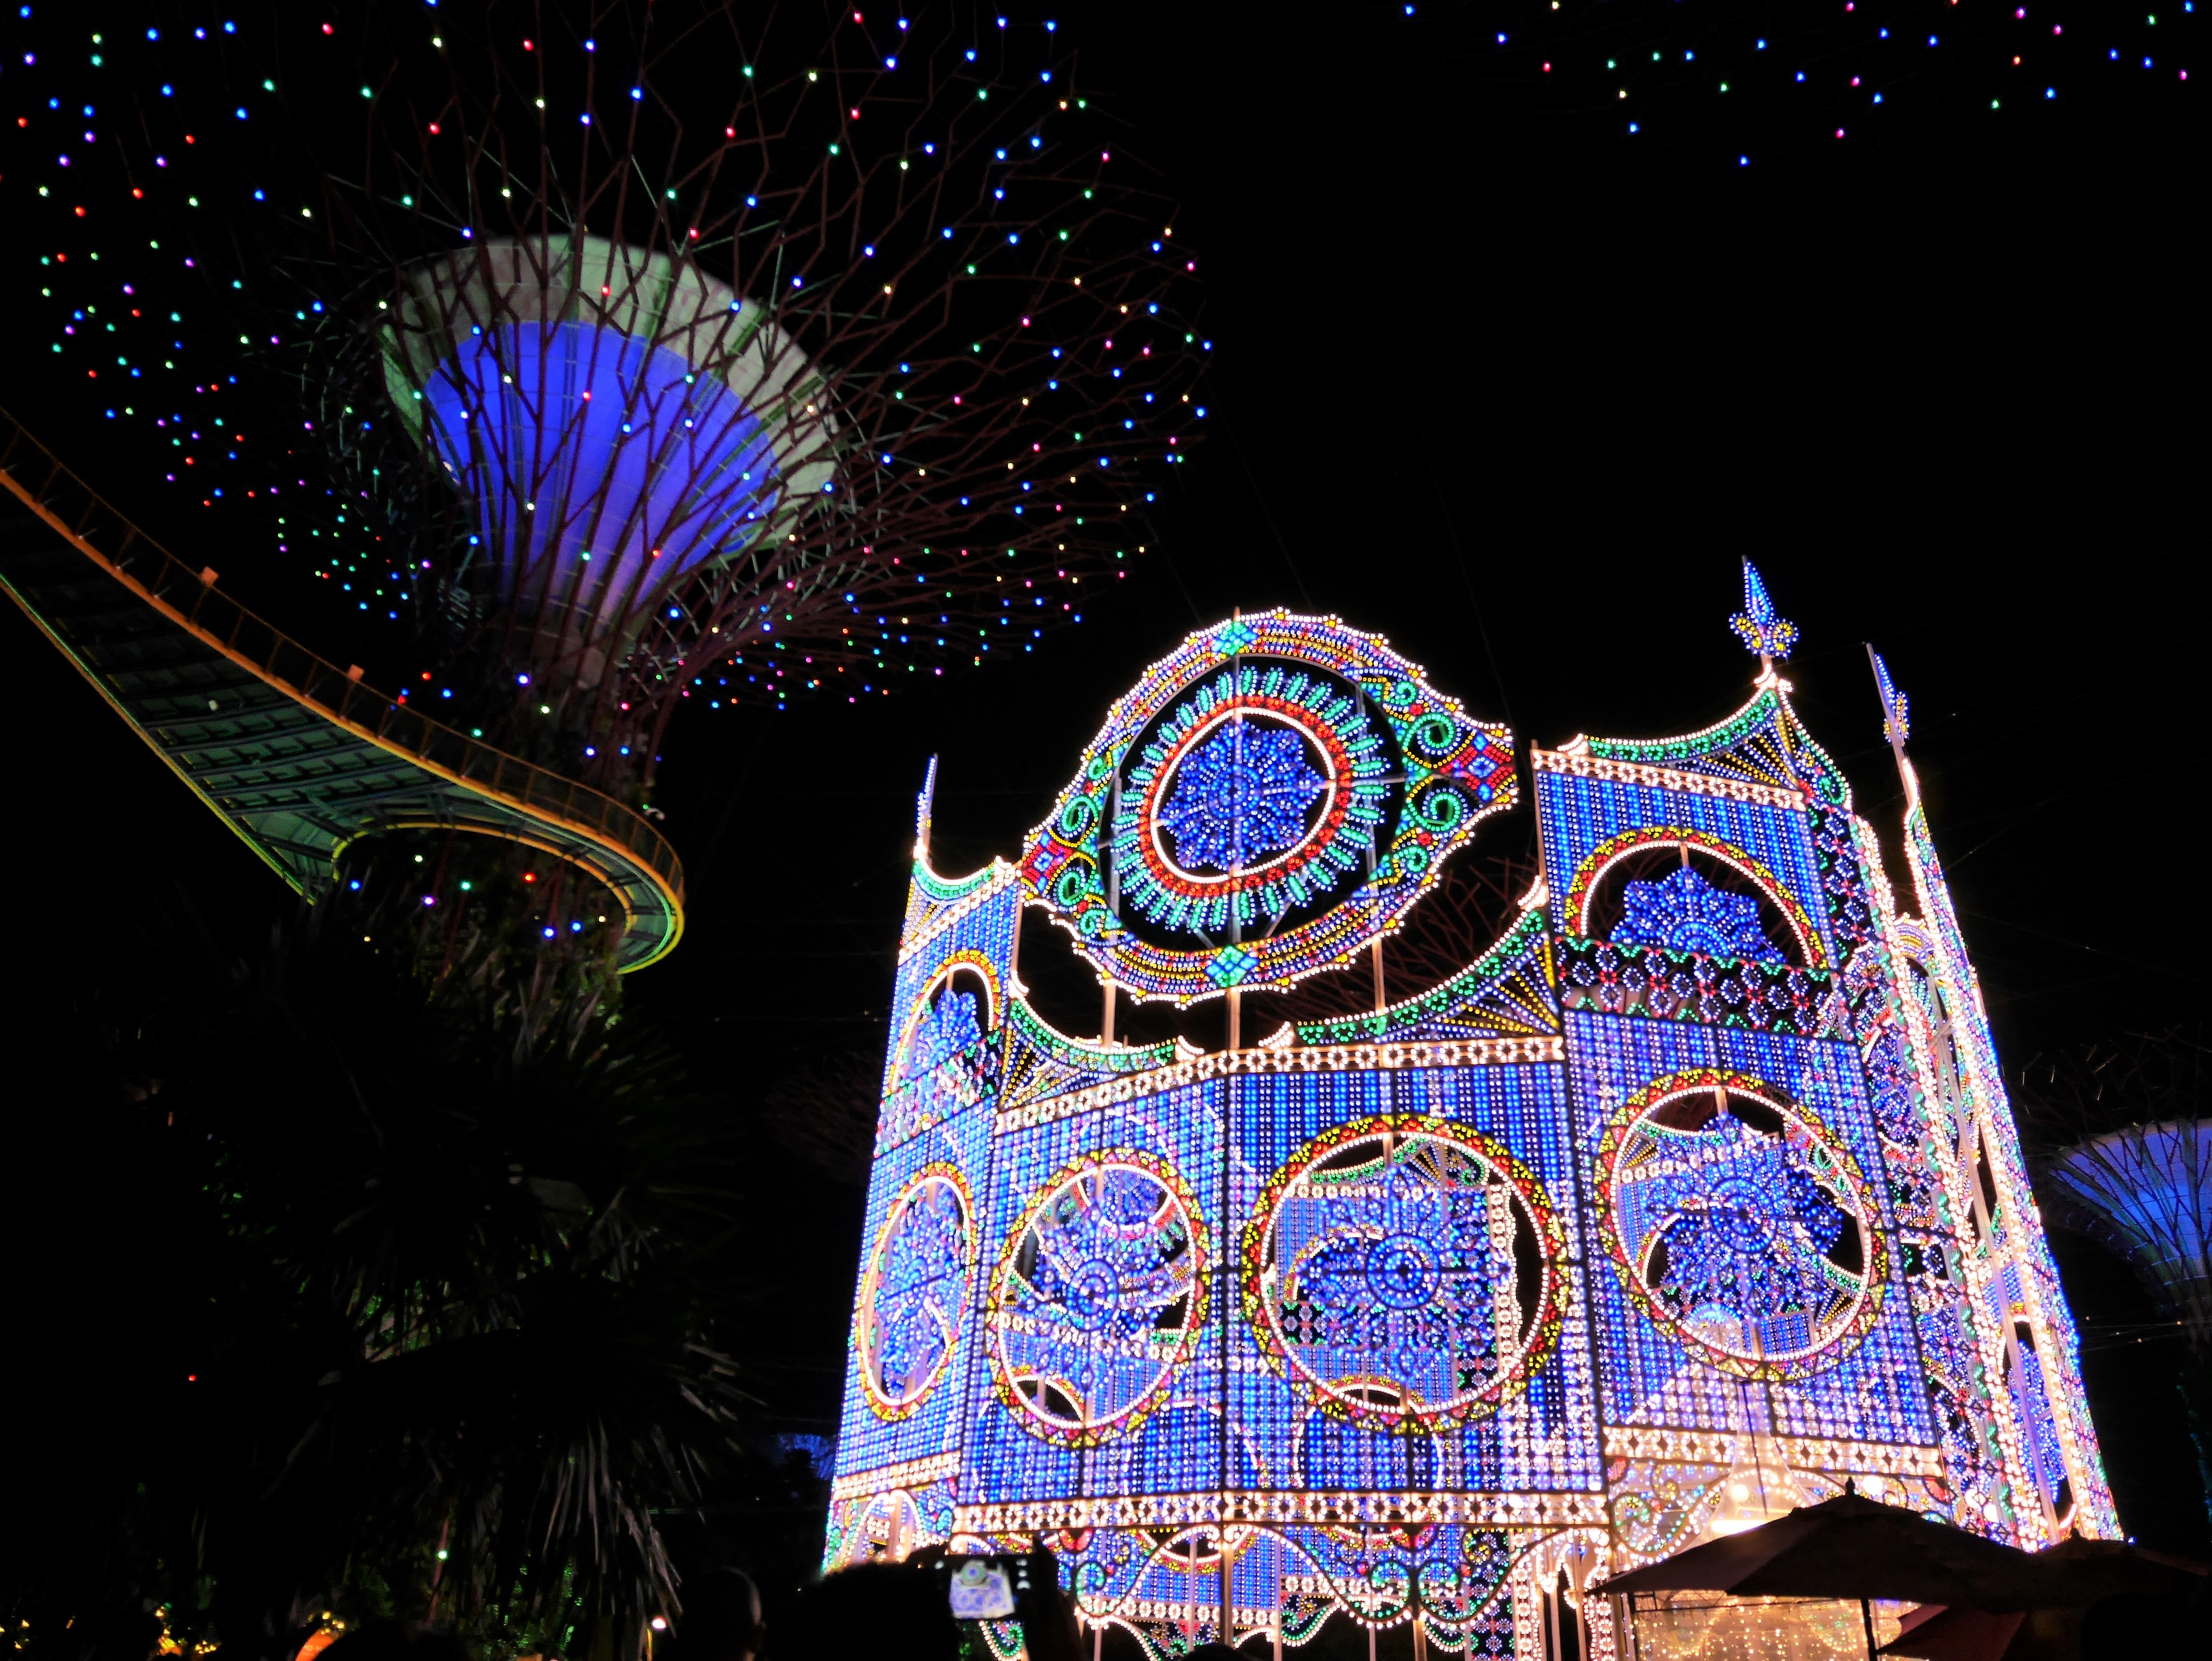 LUMINARIE ILLUMINATES: Standing at 21metres, the "Spalliera" is this year's largest Luminarie. The Spalliera is one of the 56 Italian light installations on the festival grounds. Photo: Cindy Aw